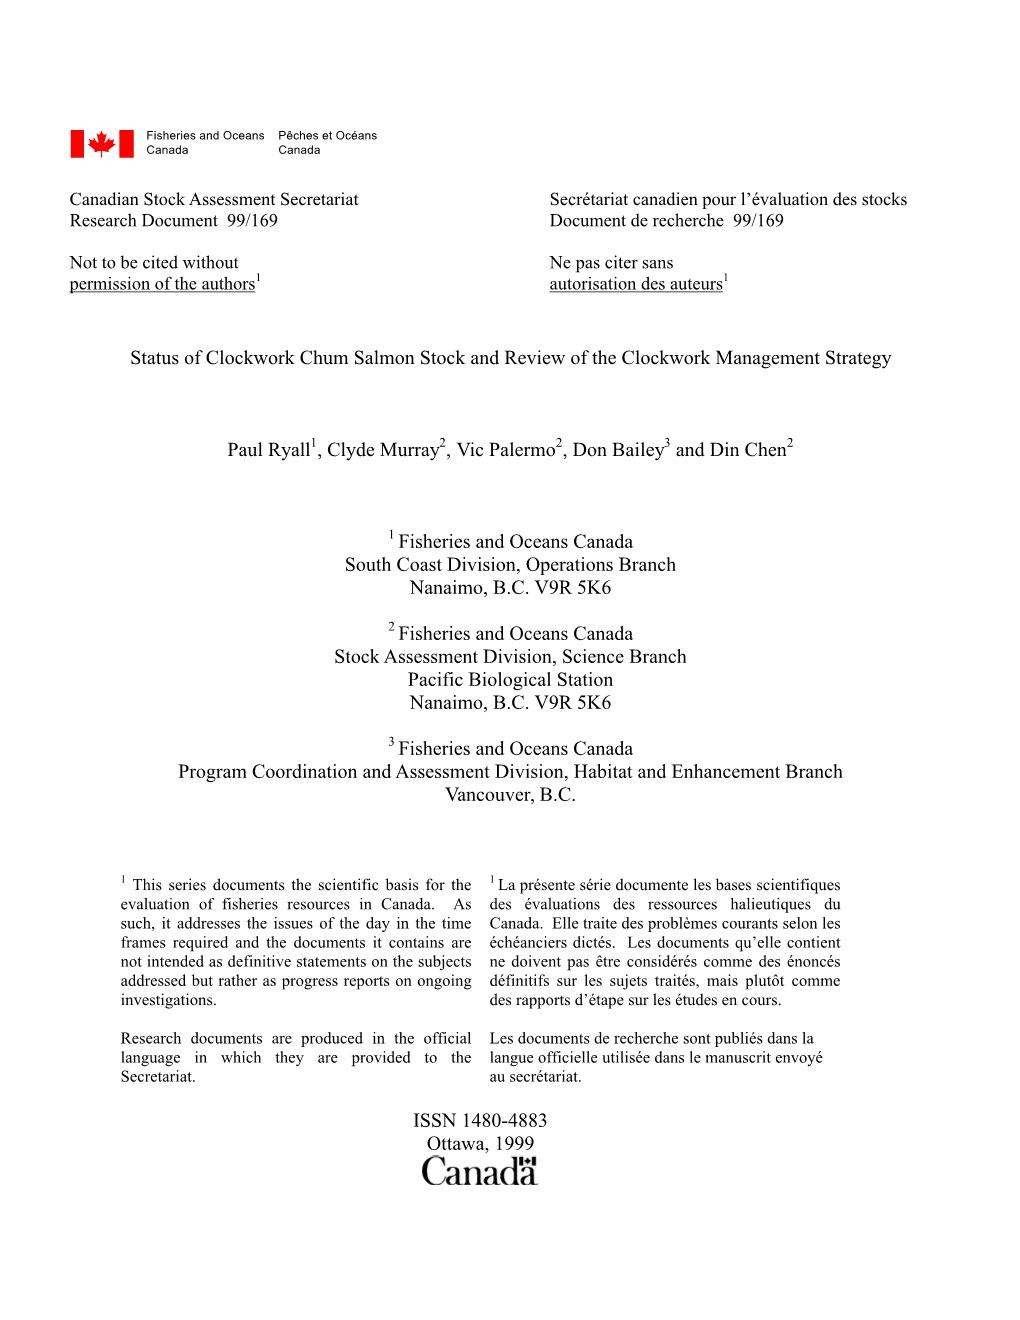 Status of Clockwork Chum Salmon Stock and Review of the Clockwork Management Strategy